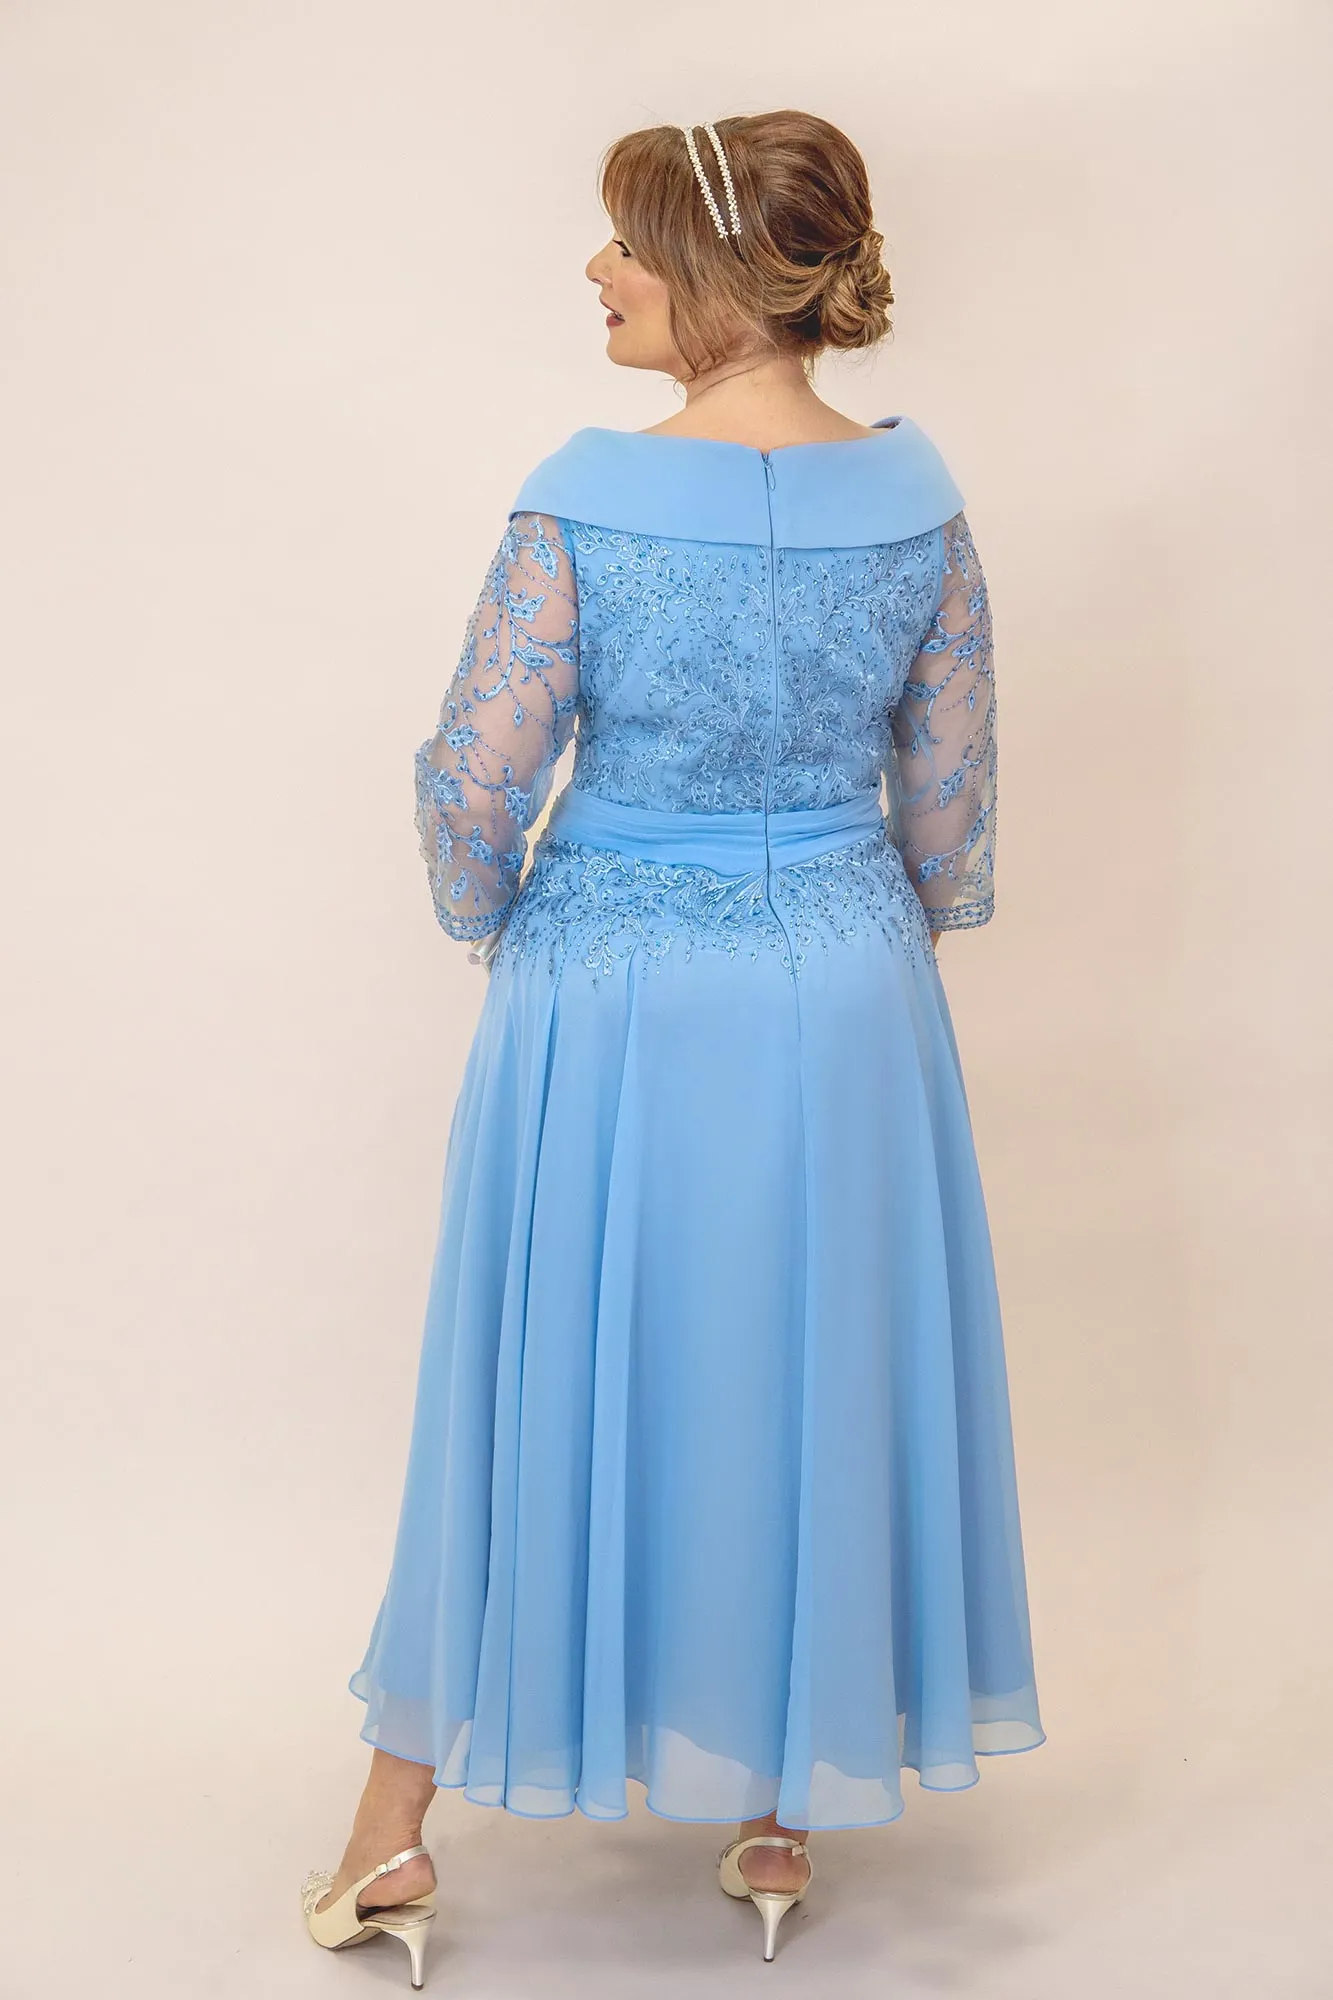 Light Sky Blue Lace Mother Of The Bride Dresses With Long Sleeves Beaded Wedding Guest Dress V Neckline Ankle Length Chiffon Evening Gowns